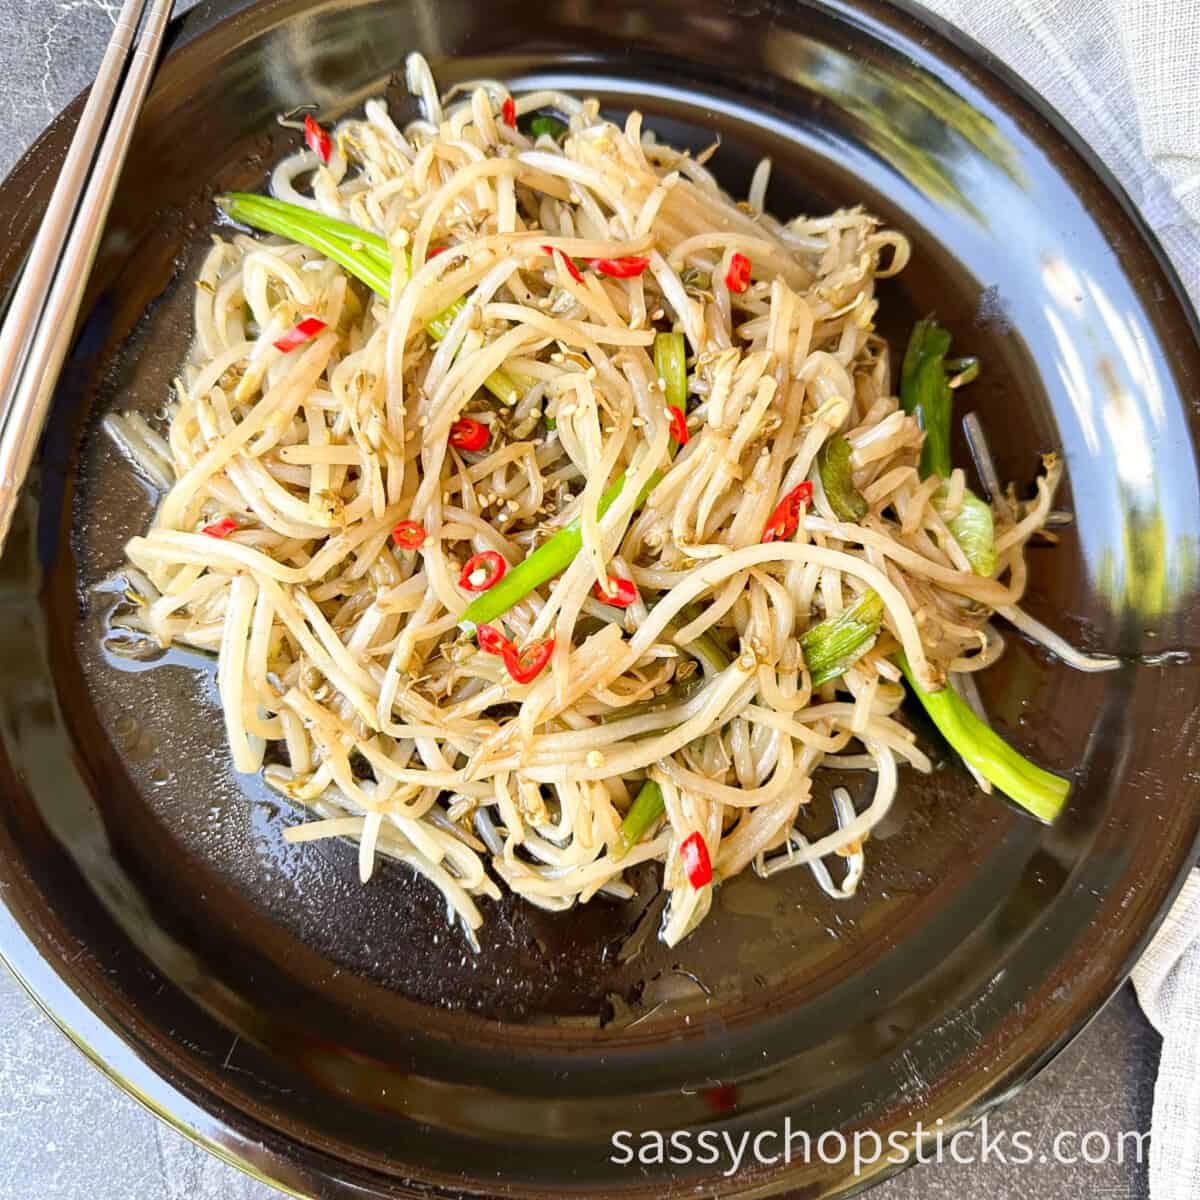 stir fry mung bean sprouts 5